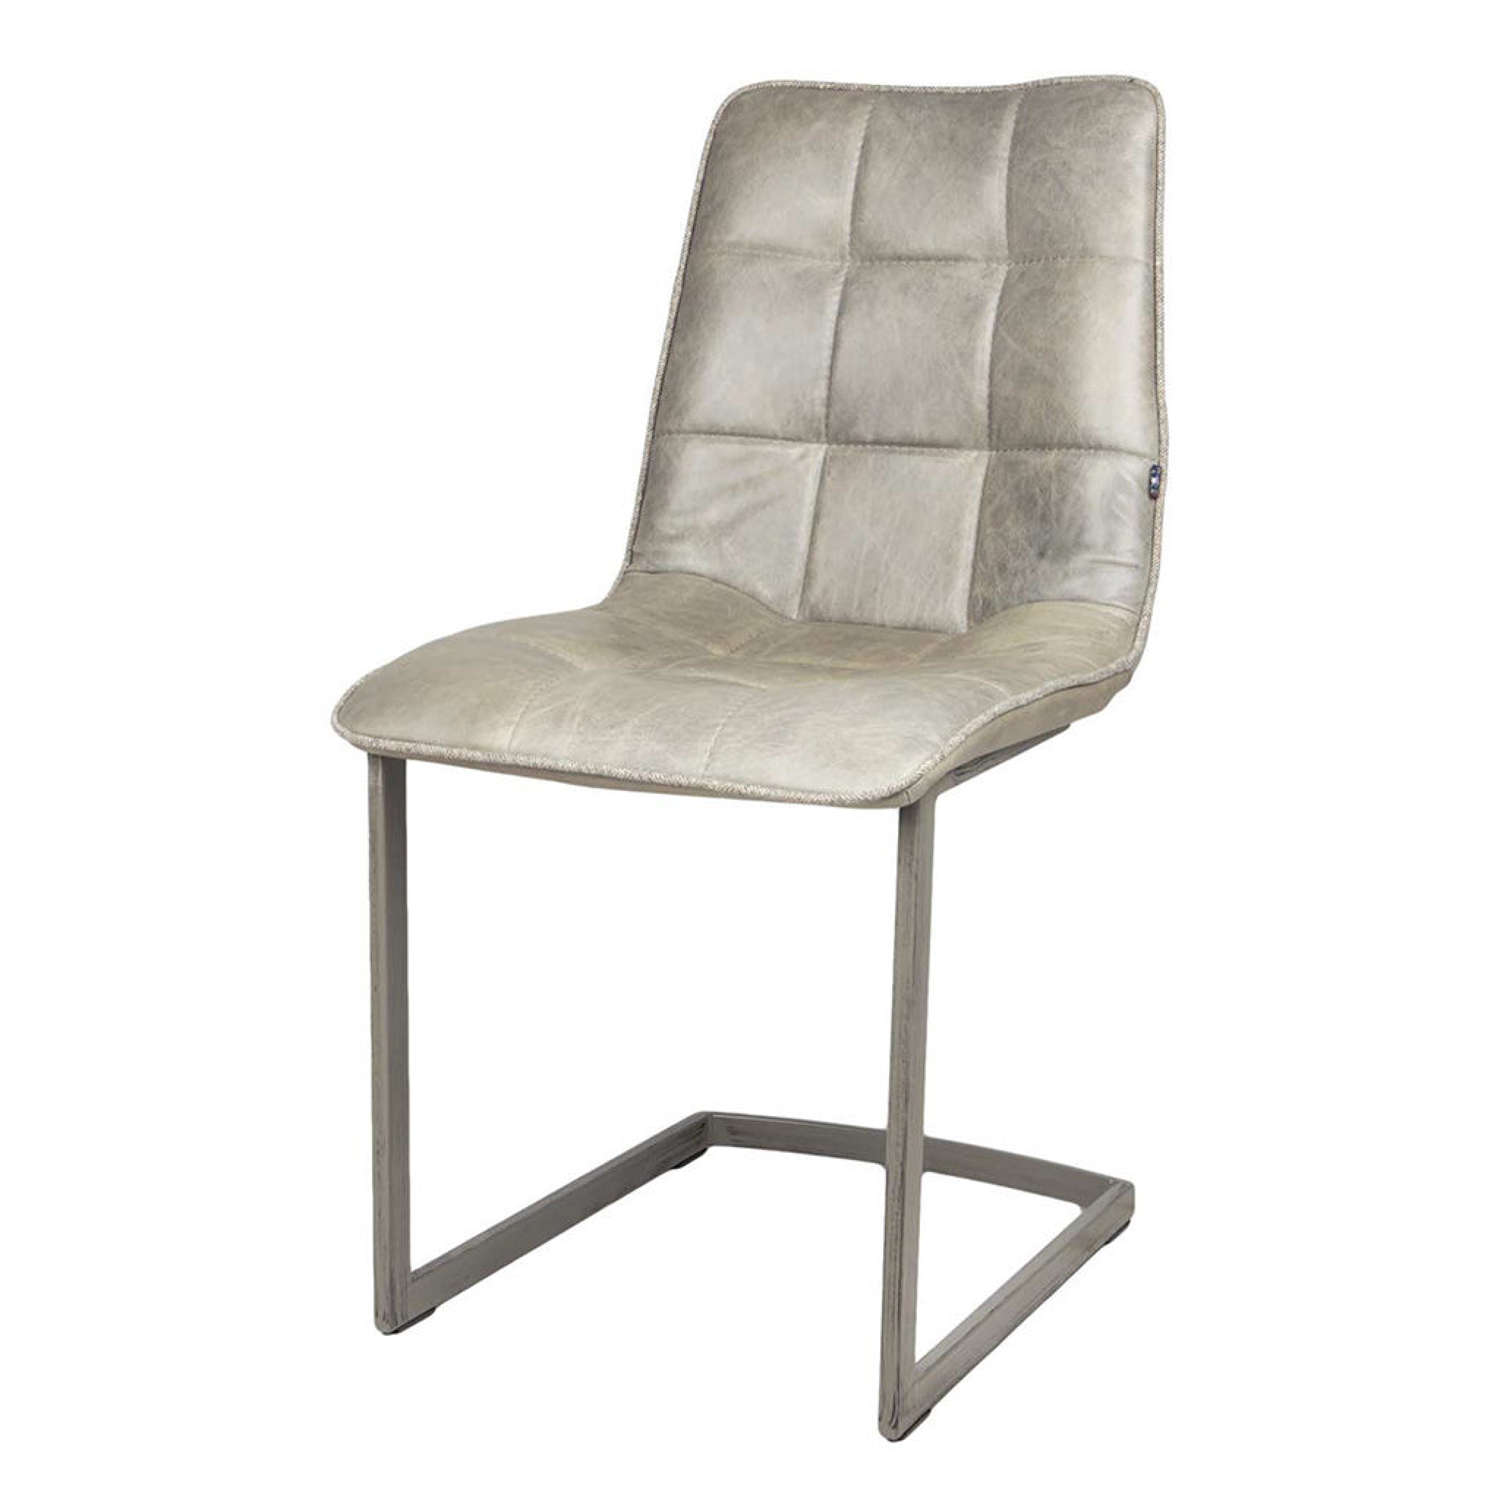 Dolomite Cerato Grey leather Dining Chair with piping